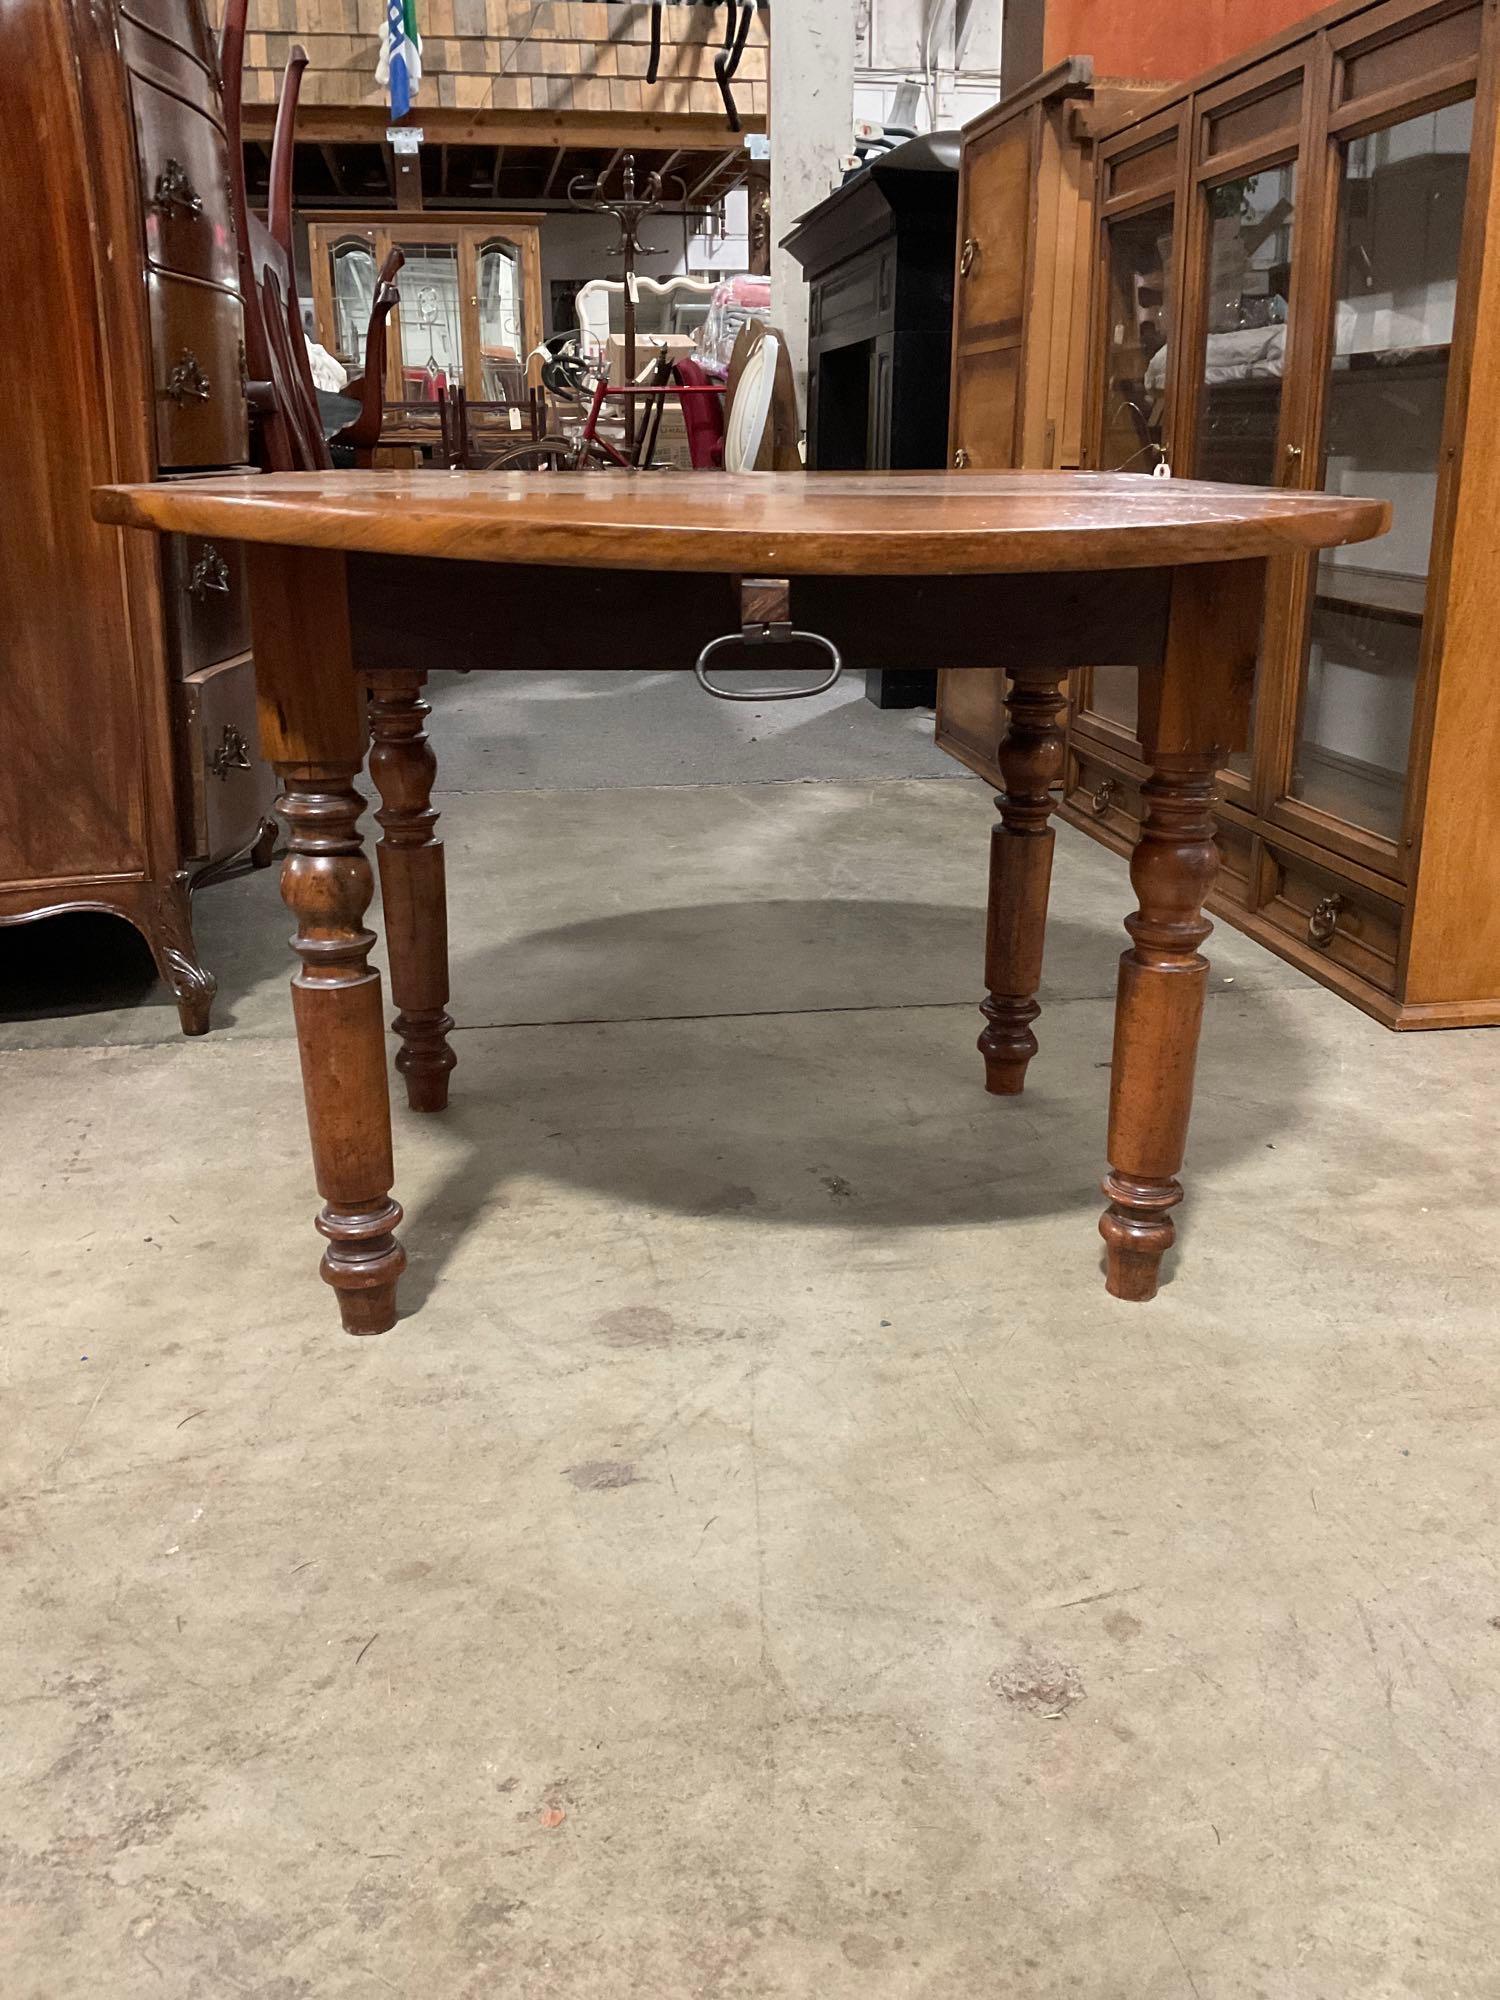 Vintage Round Wooden Drop Leaf Table w/ Spindle Legs. See pics,